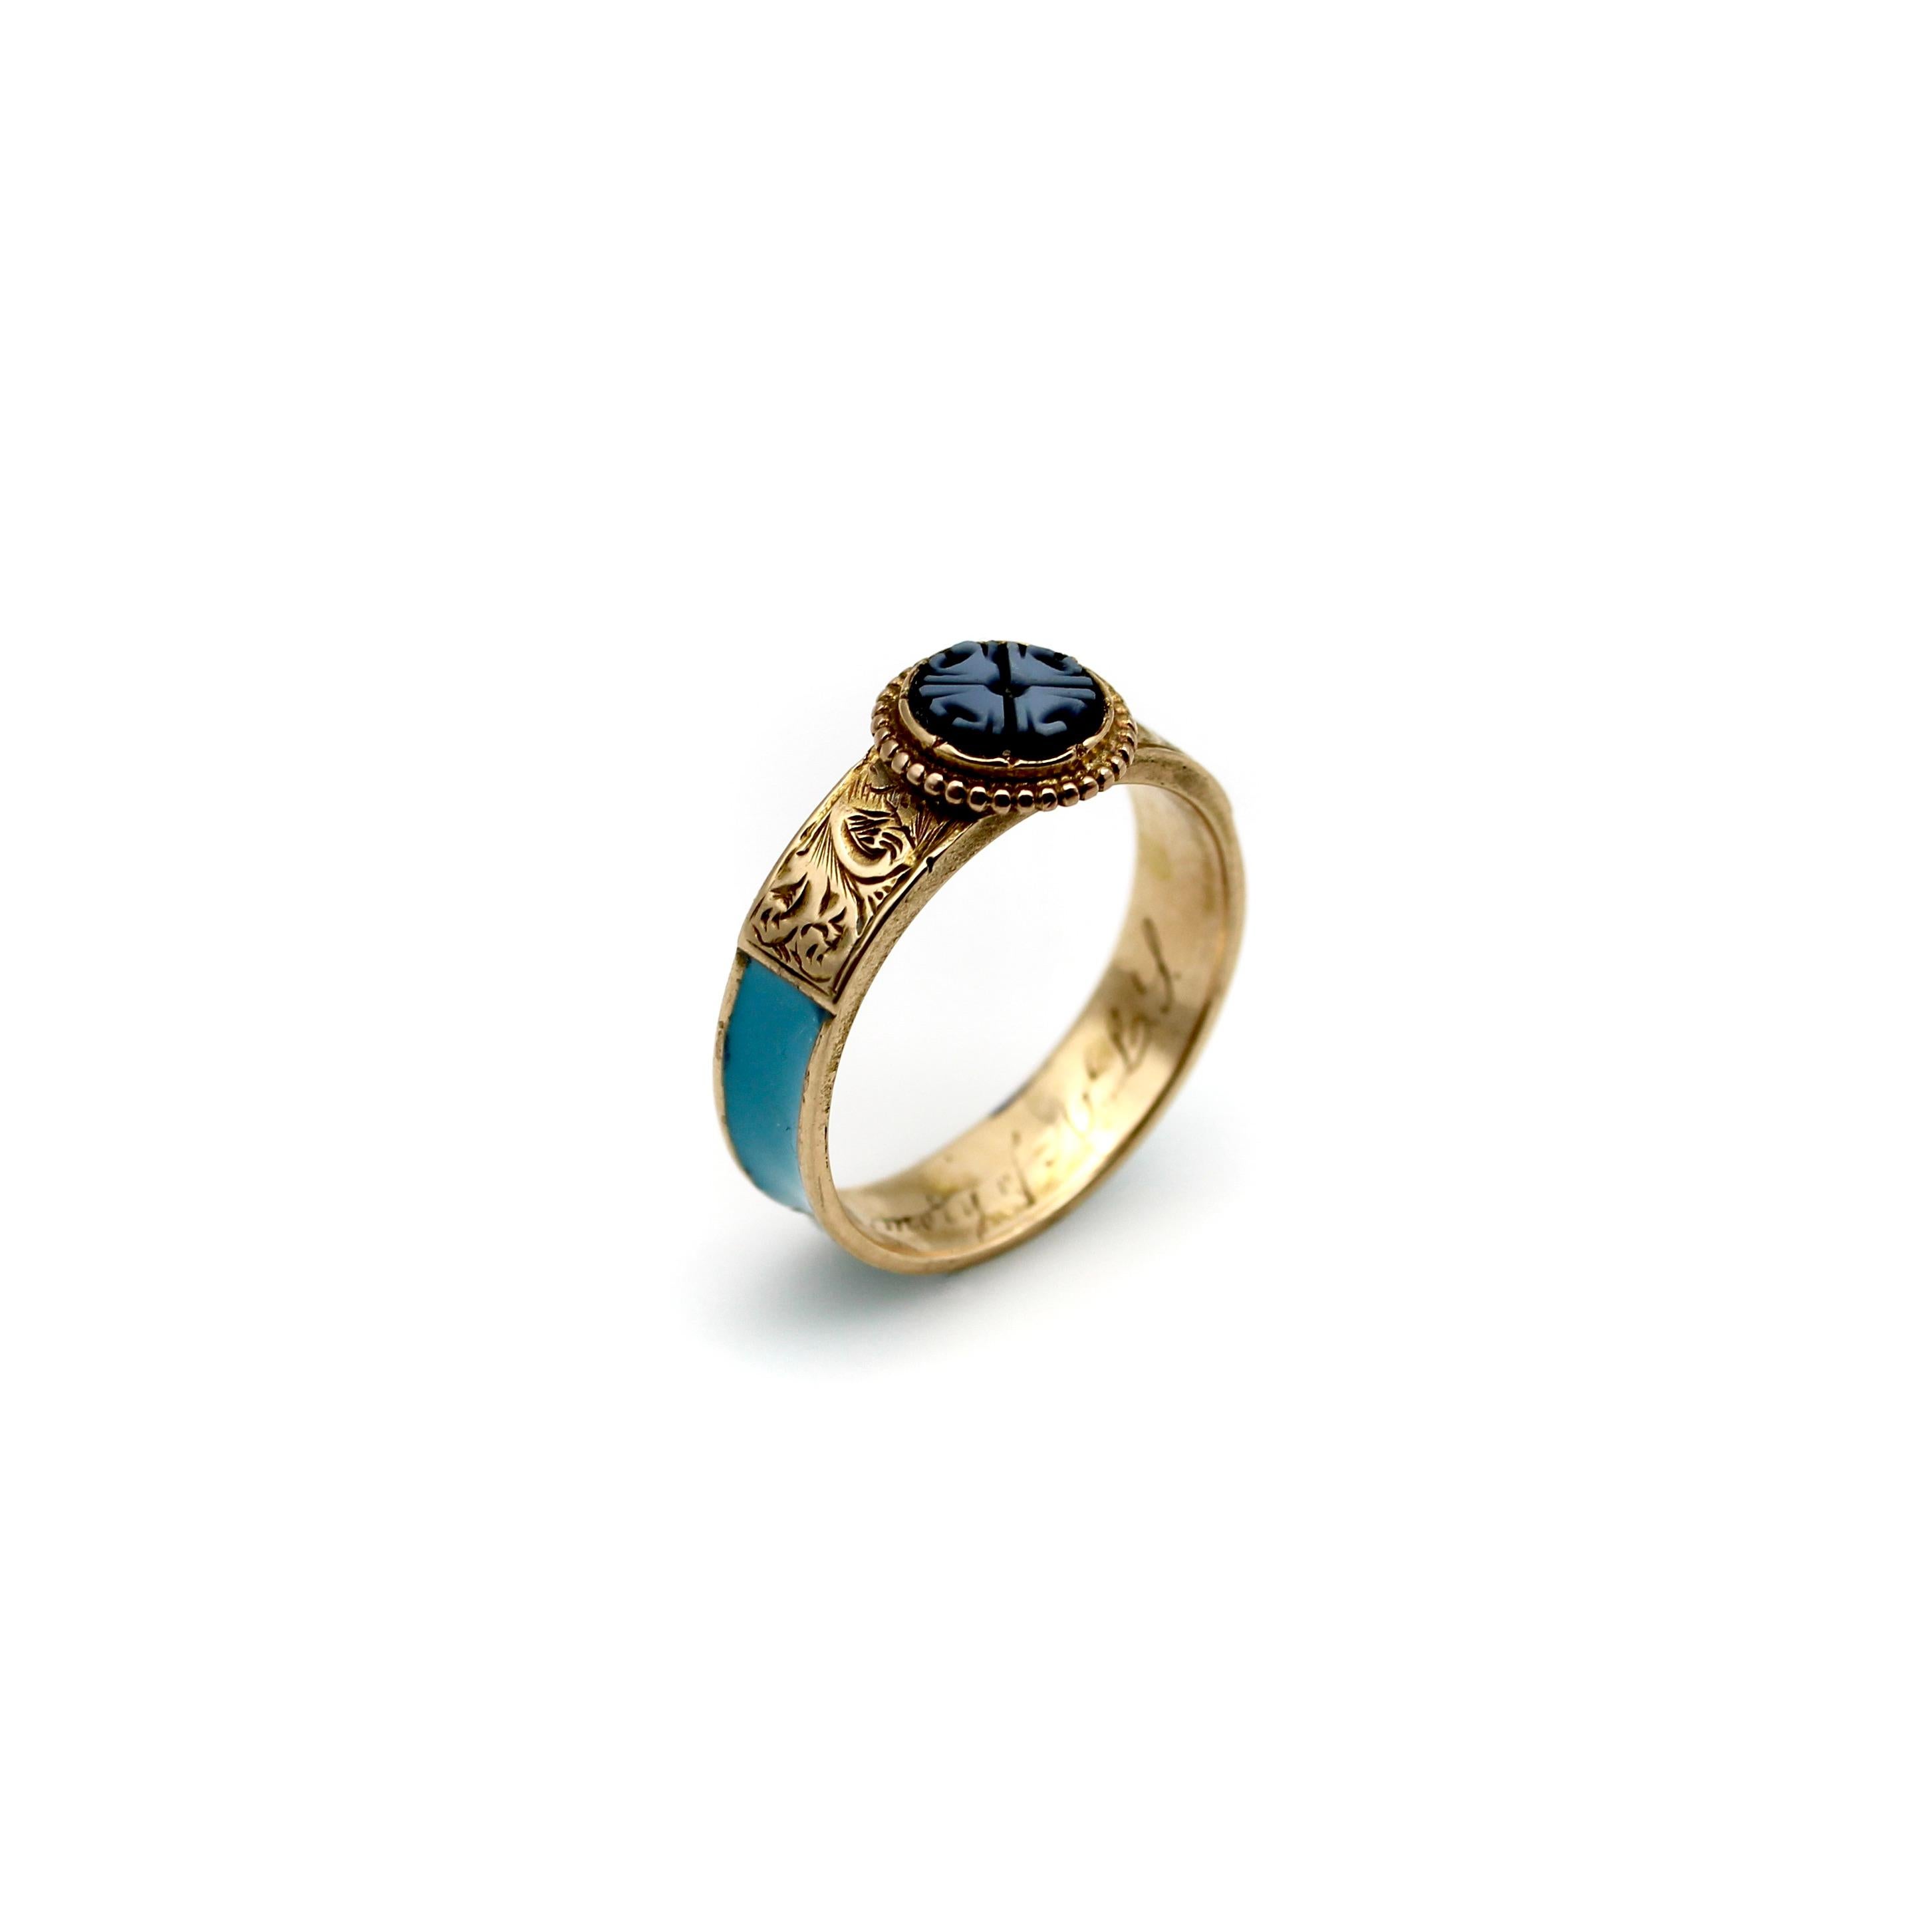 This delicate and dear 14k gold ring combines some of the most enticing qualities of Victorian mourning jewelry. In its center is a banded agate disk carved with a quatrefoil design. The agate contains two shades of blue that create an intricate